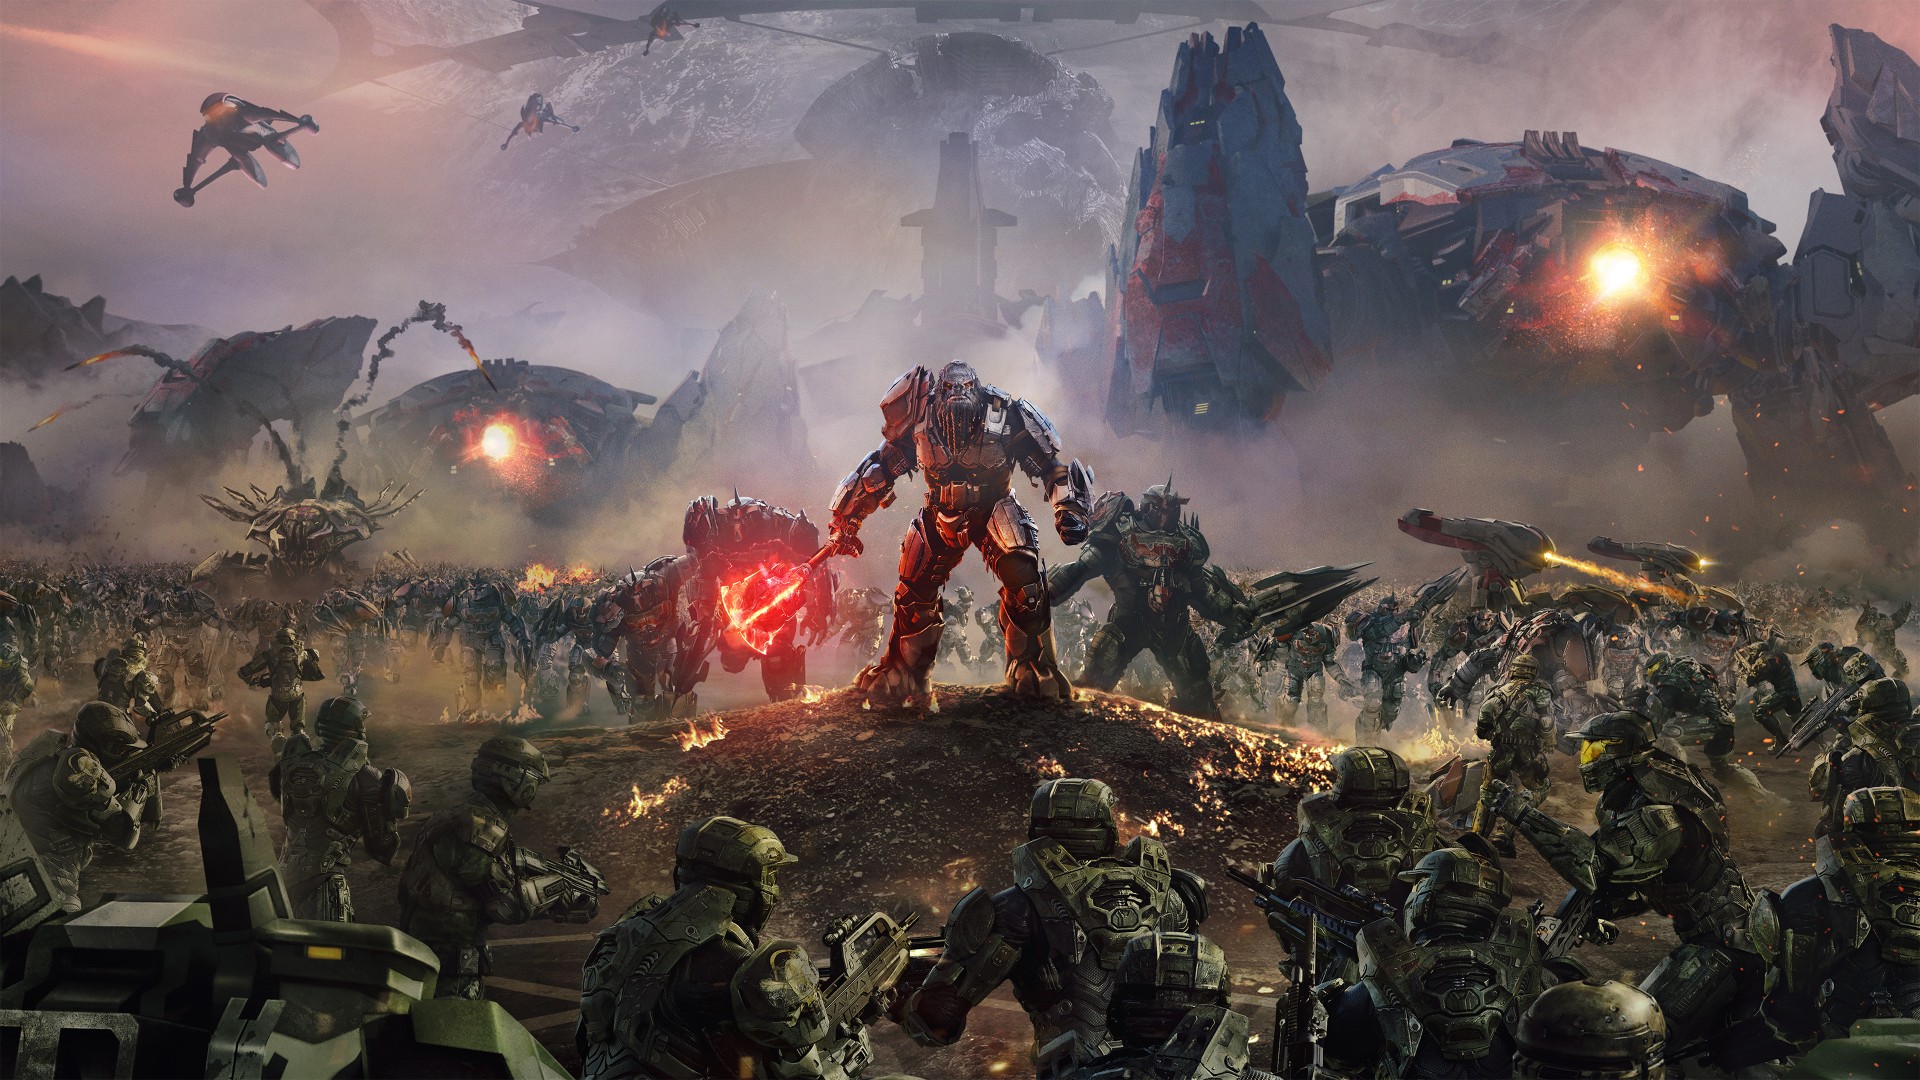 Video Game Halo Wars 2 HD Wallpaper | Background Image